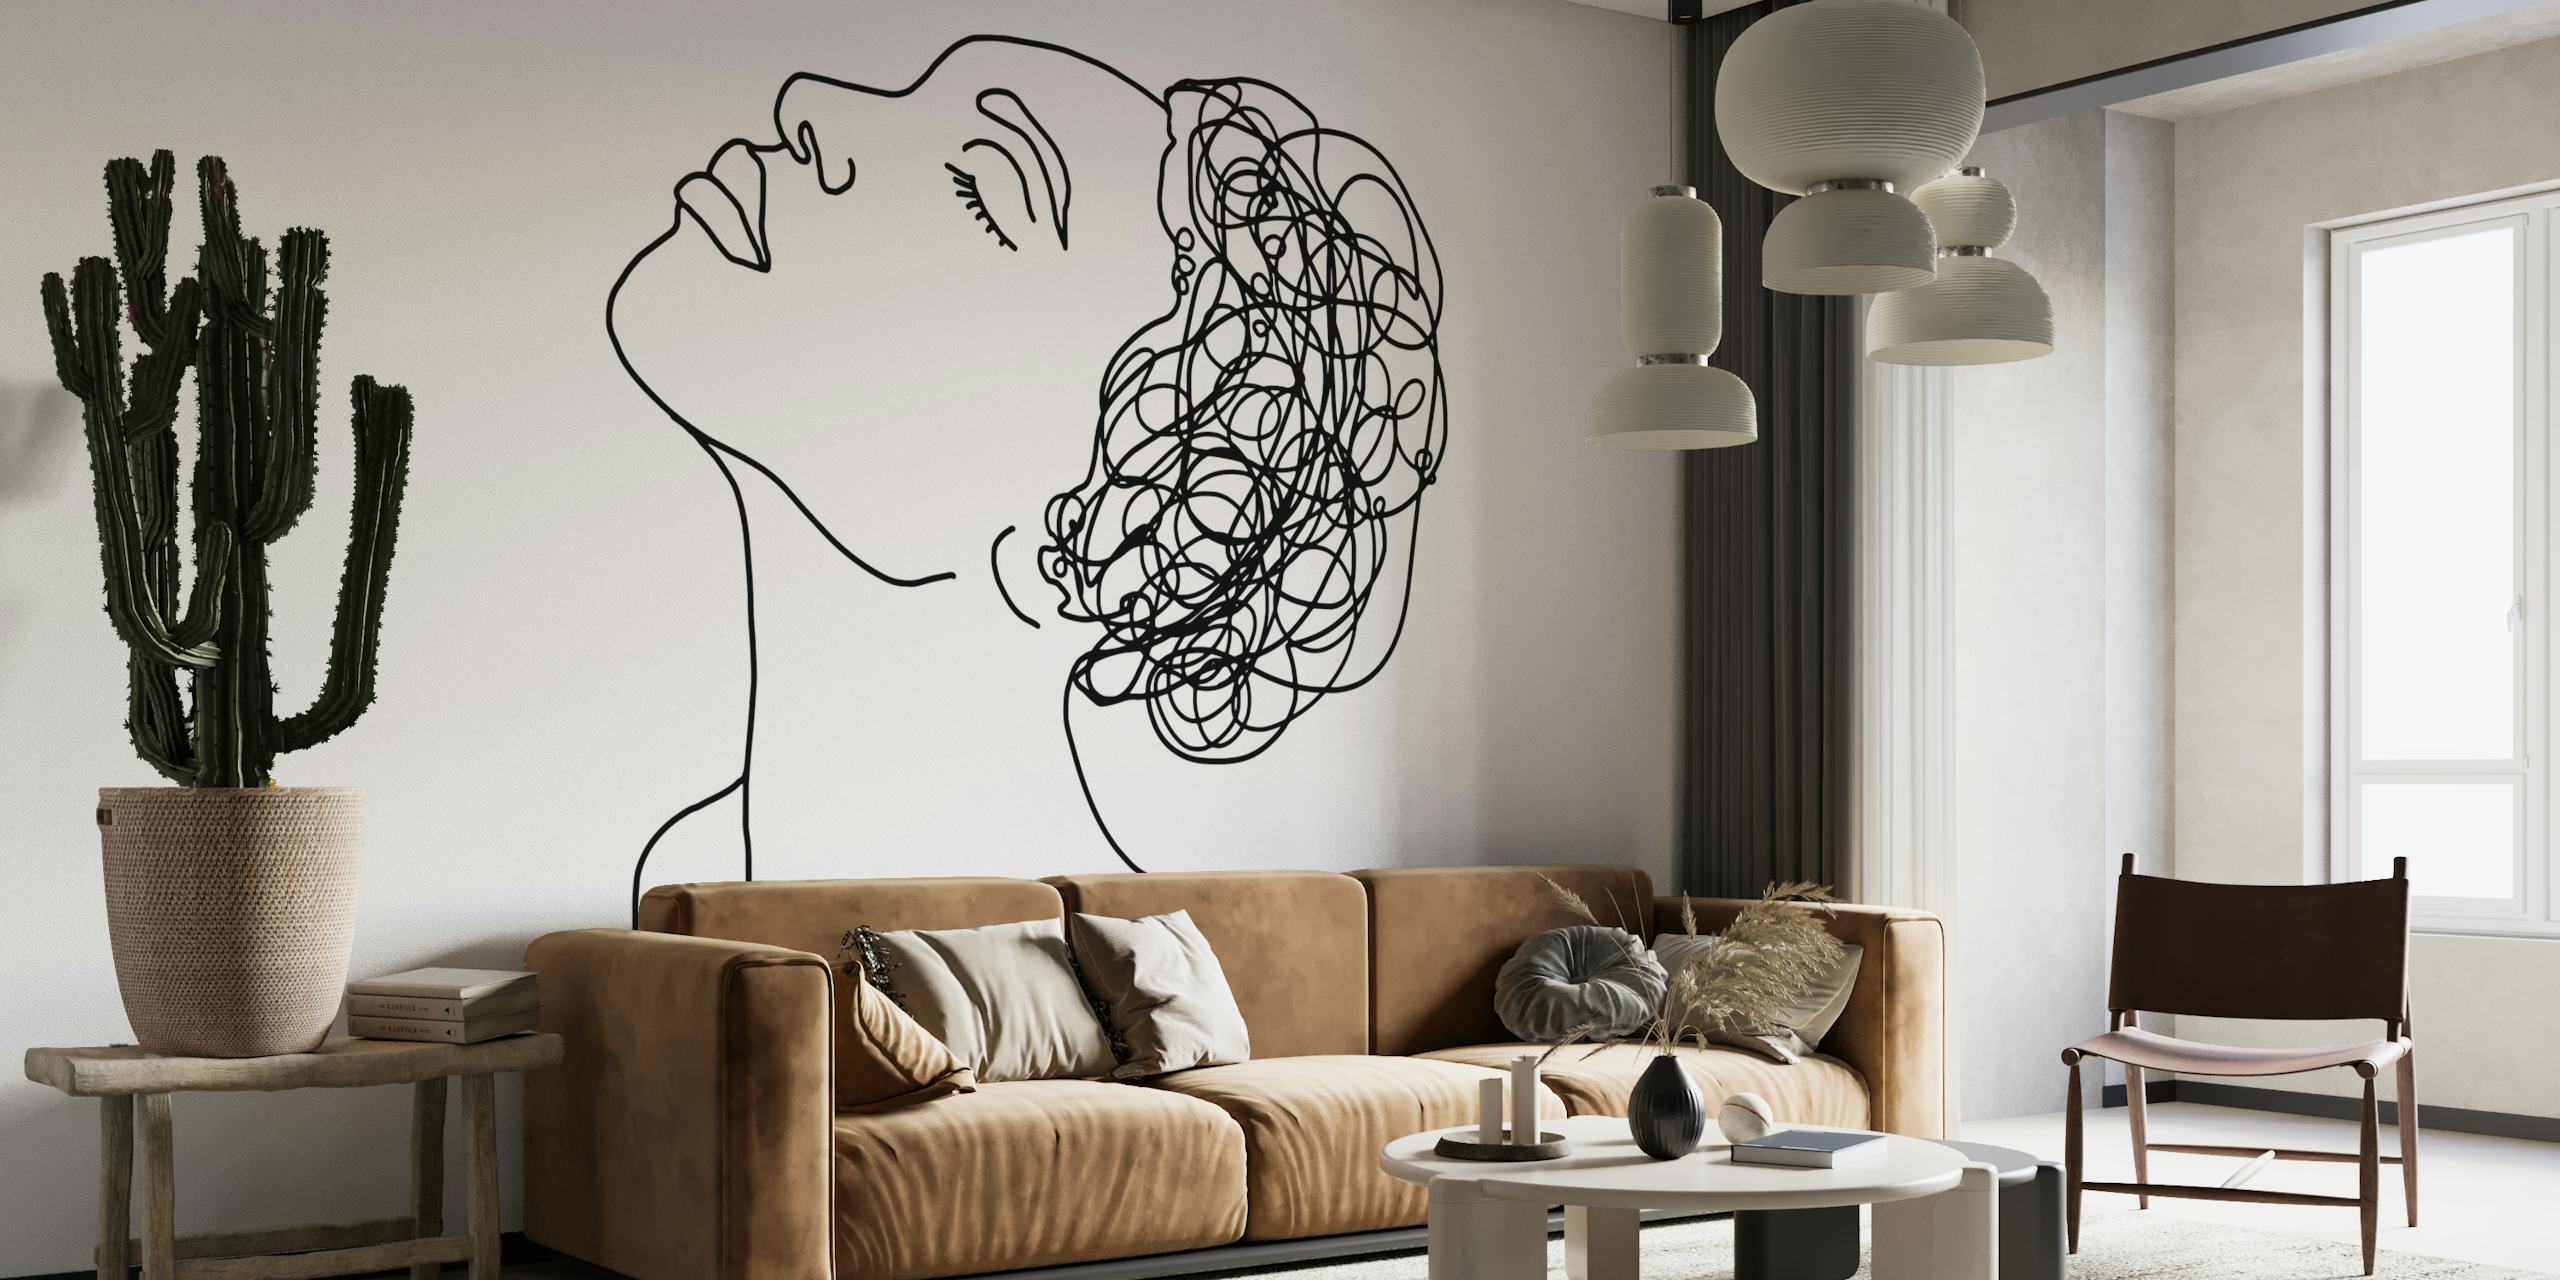 Minimalist line drawing wall mural of a woman's profile